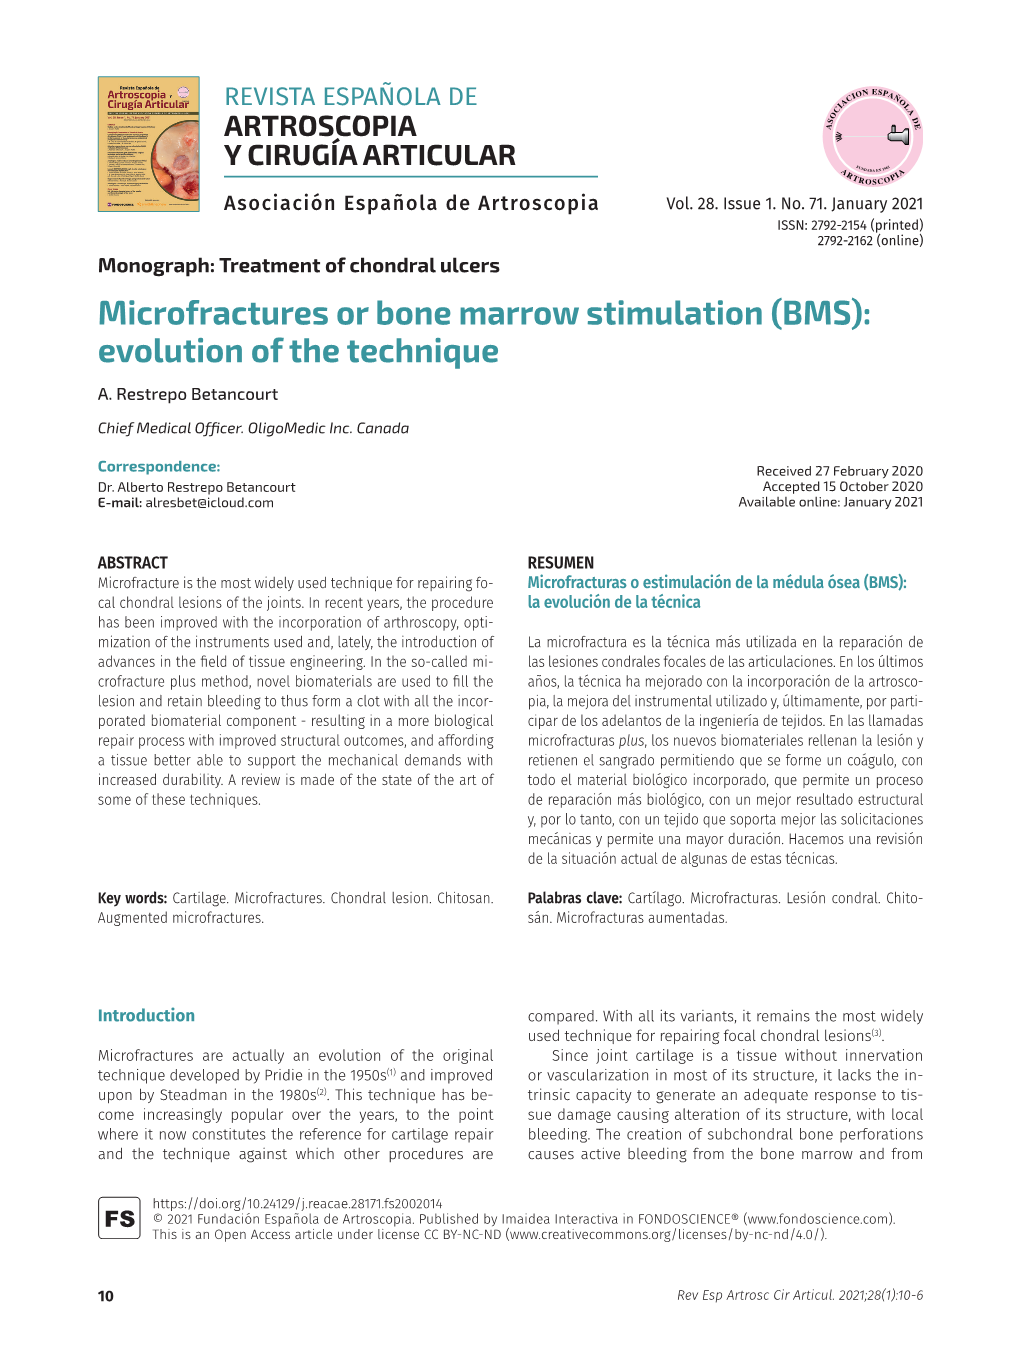 Microfractures Or Bone Marrow Stimulation (BMS): Evolution of the Technique A